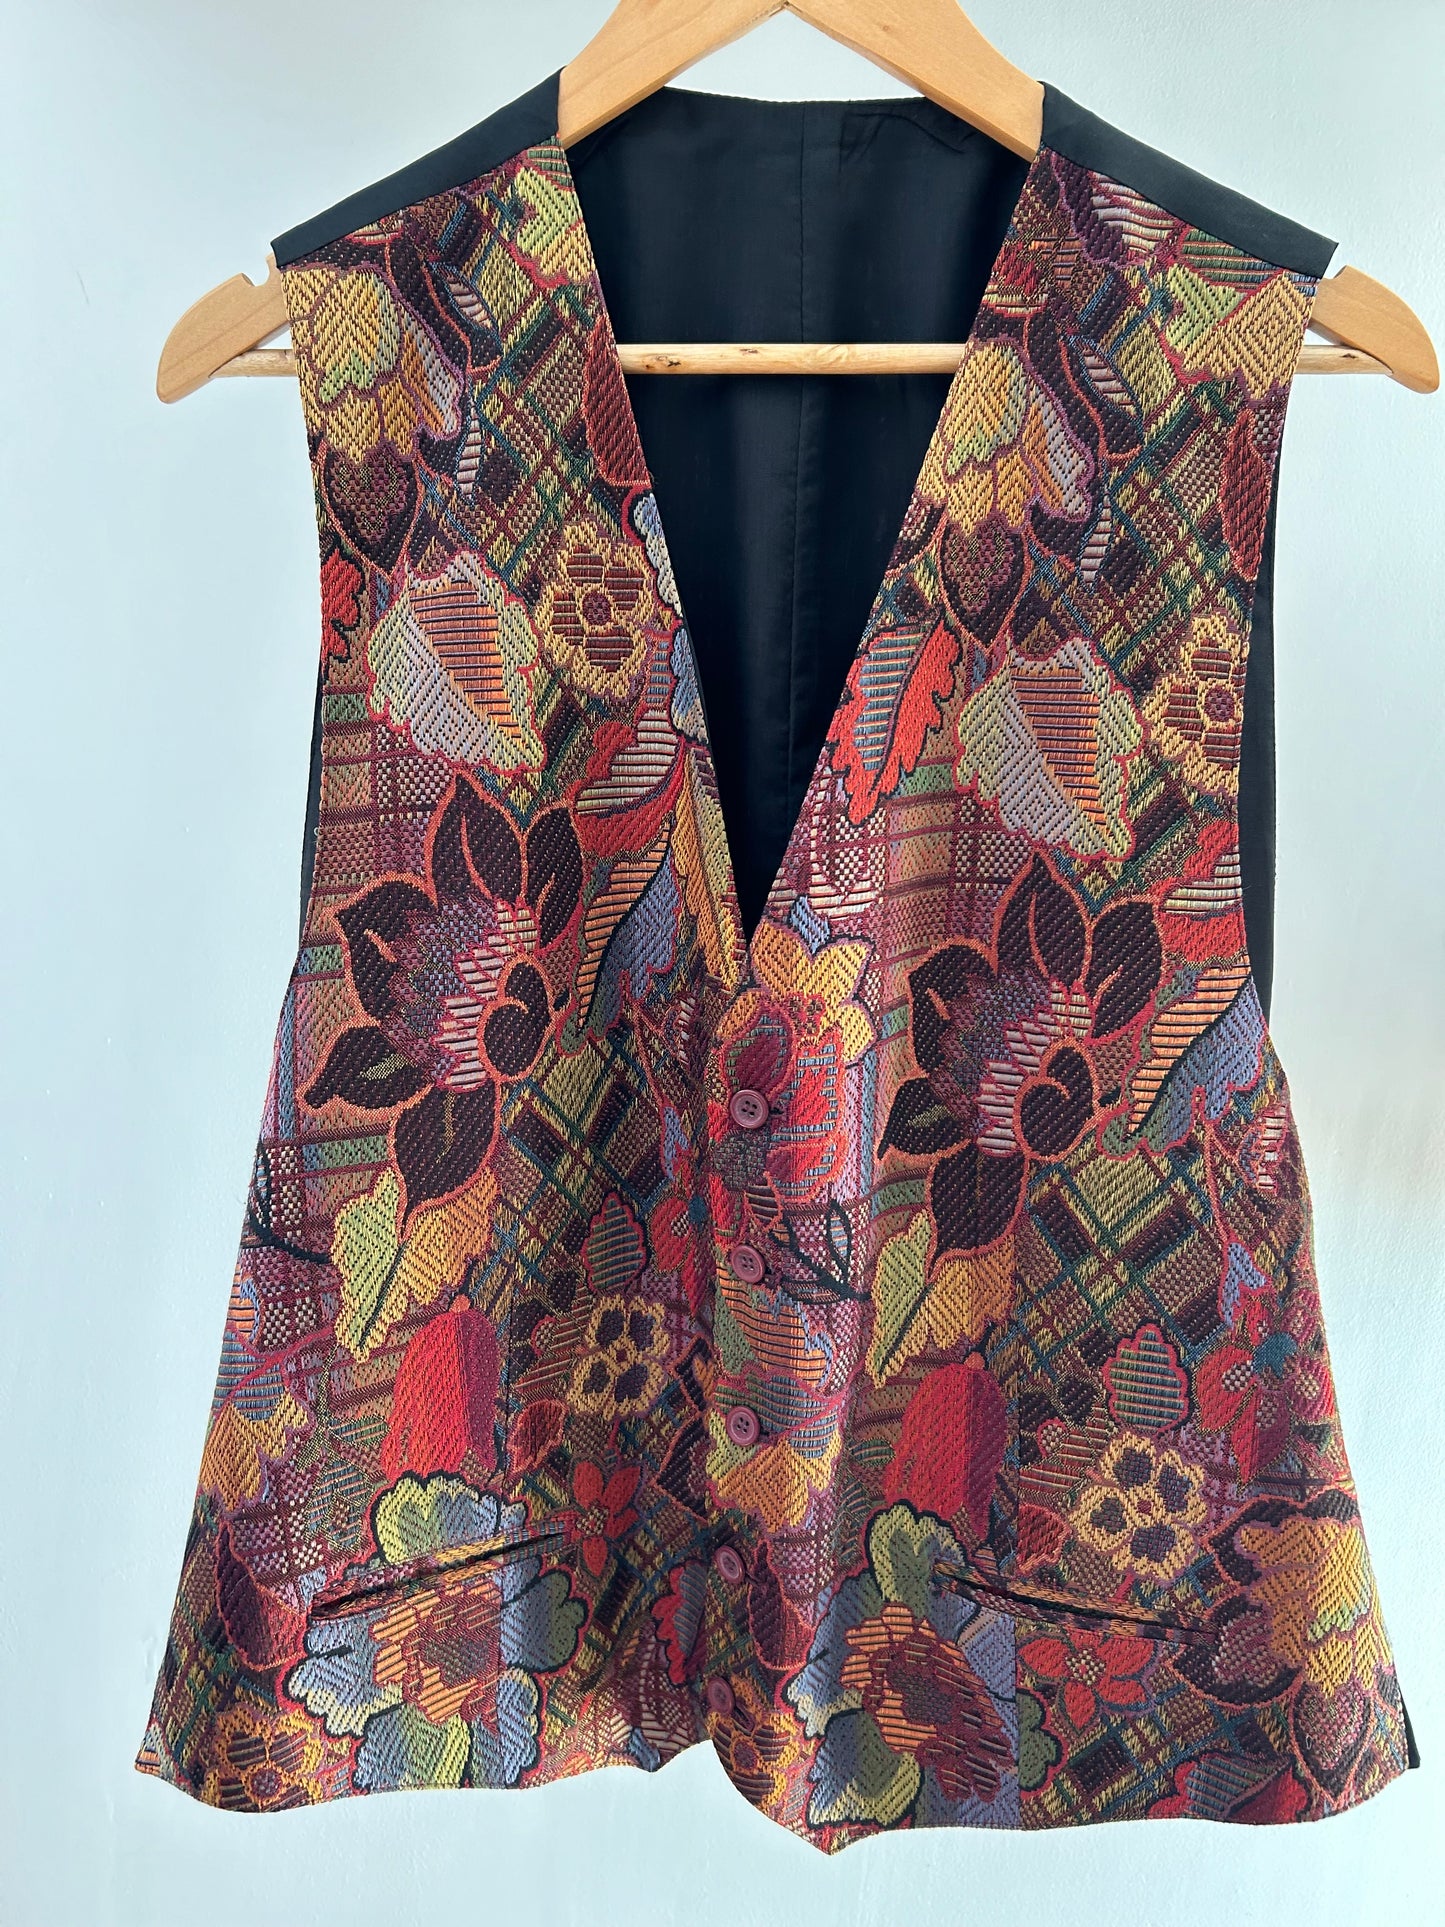 Vintage 1980s/90s UK Size 14-16 Earthy Tones Floral Pattern Tapestry Waistcoat